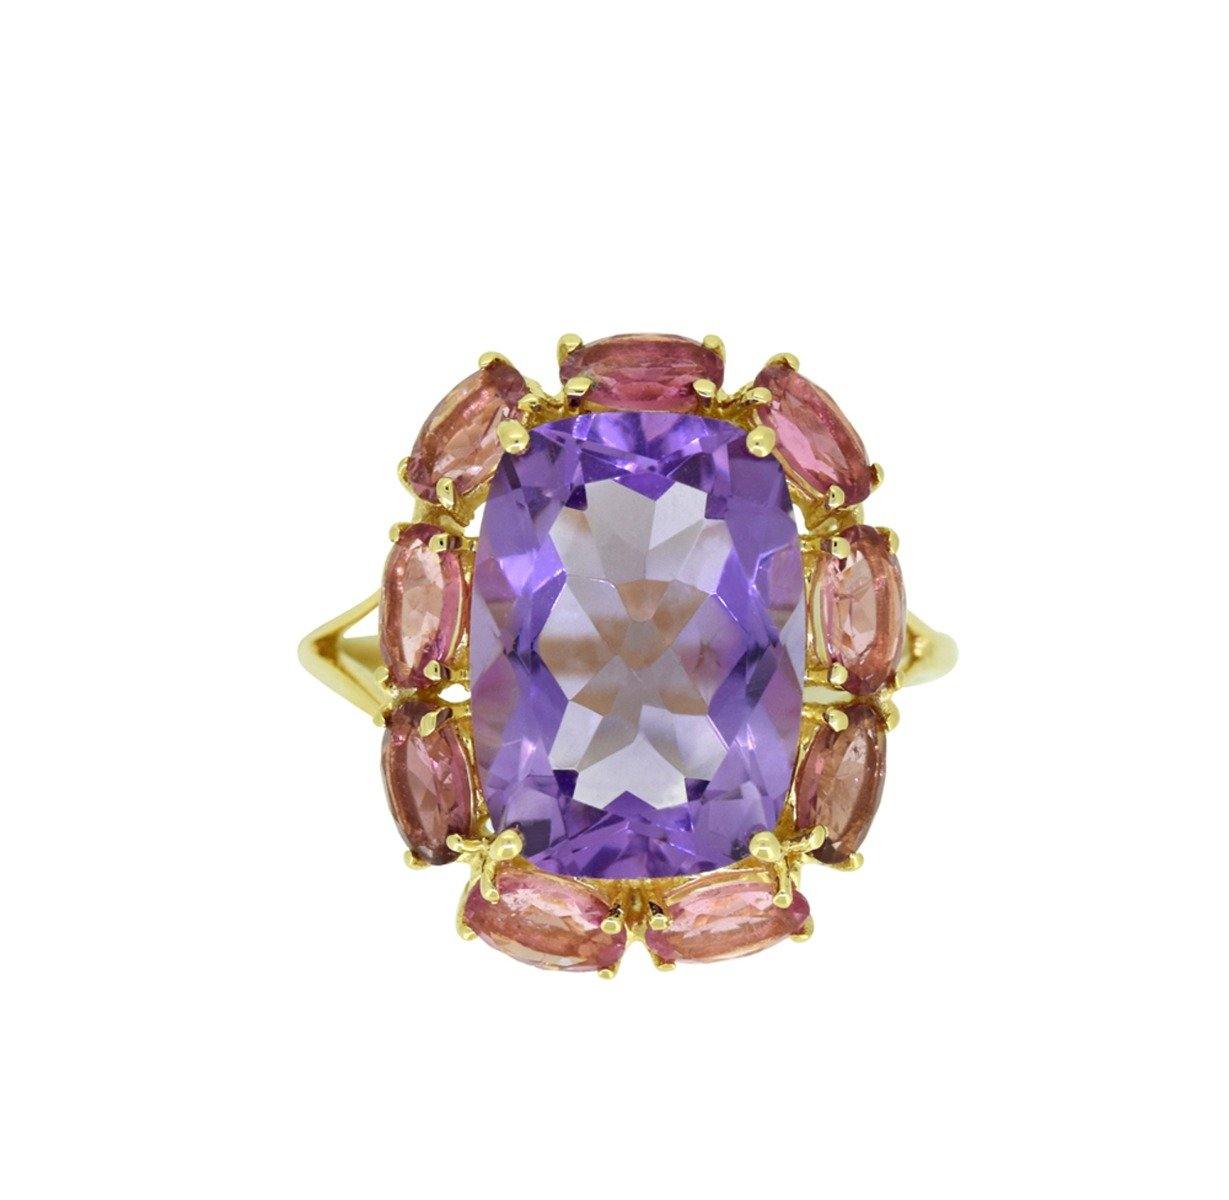 8.30 Ct Pink Amethyst Tourmaline Solid 14k Yellow Gold Cluster Ring Jewelry - YoTreasure